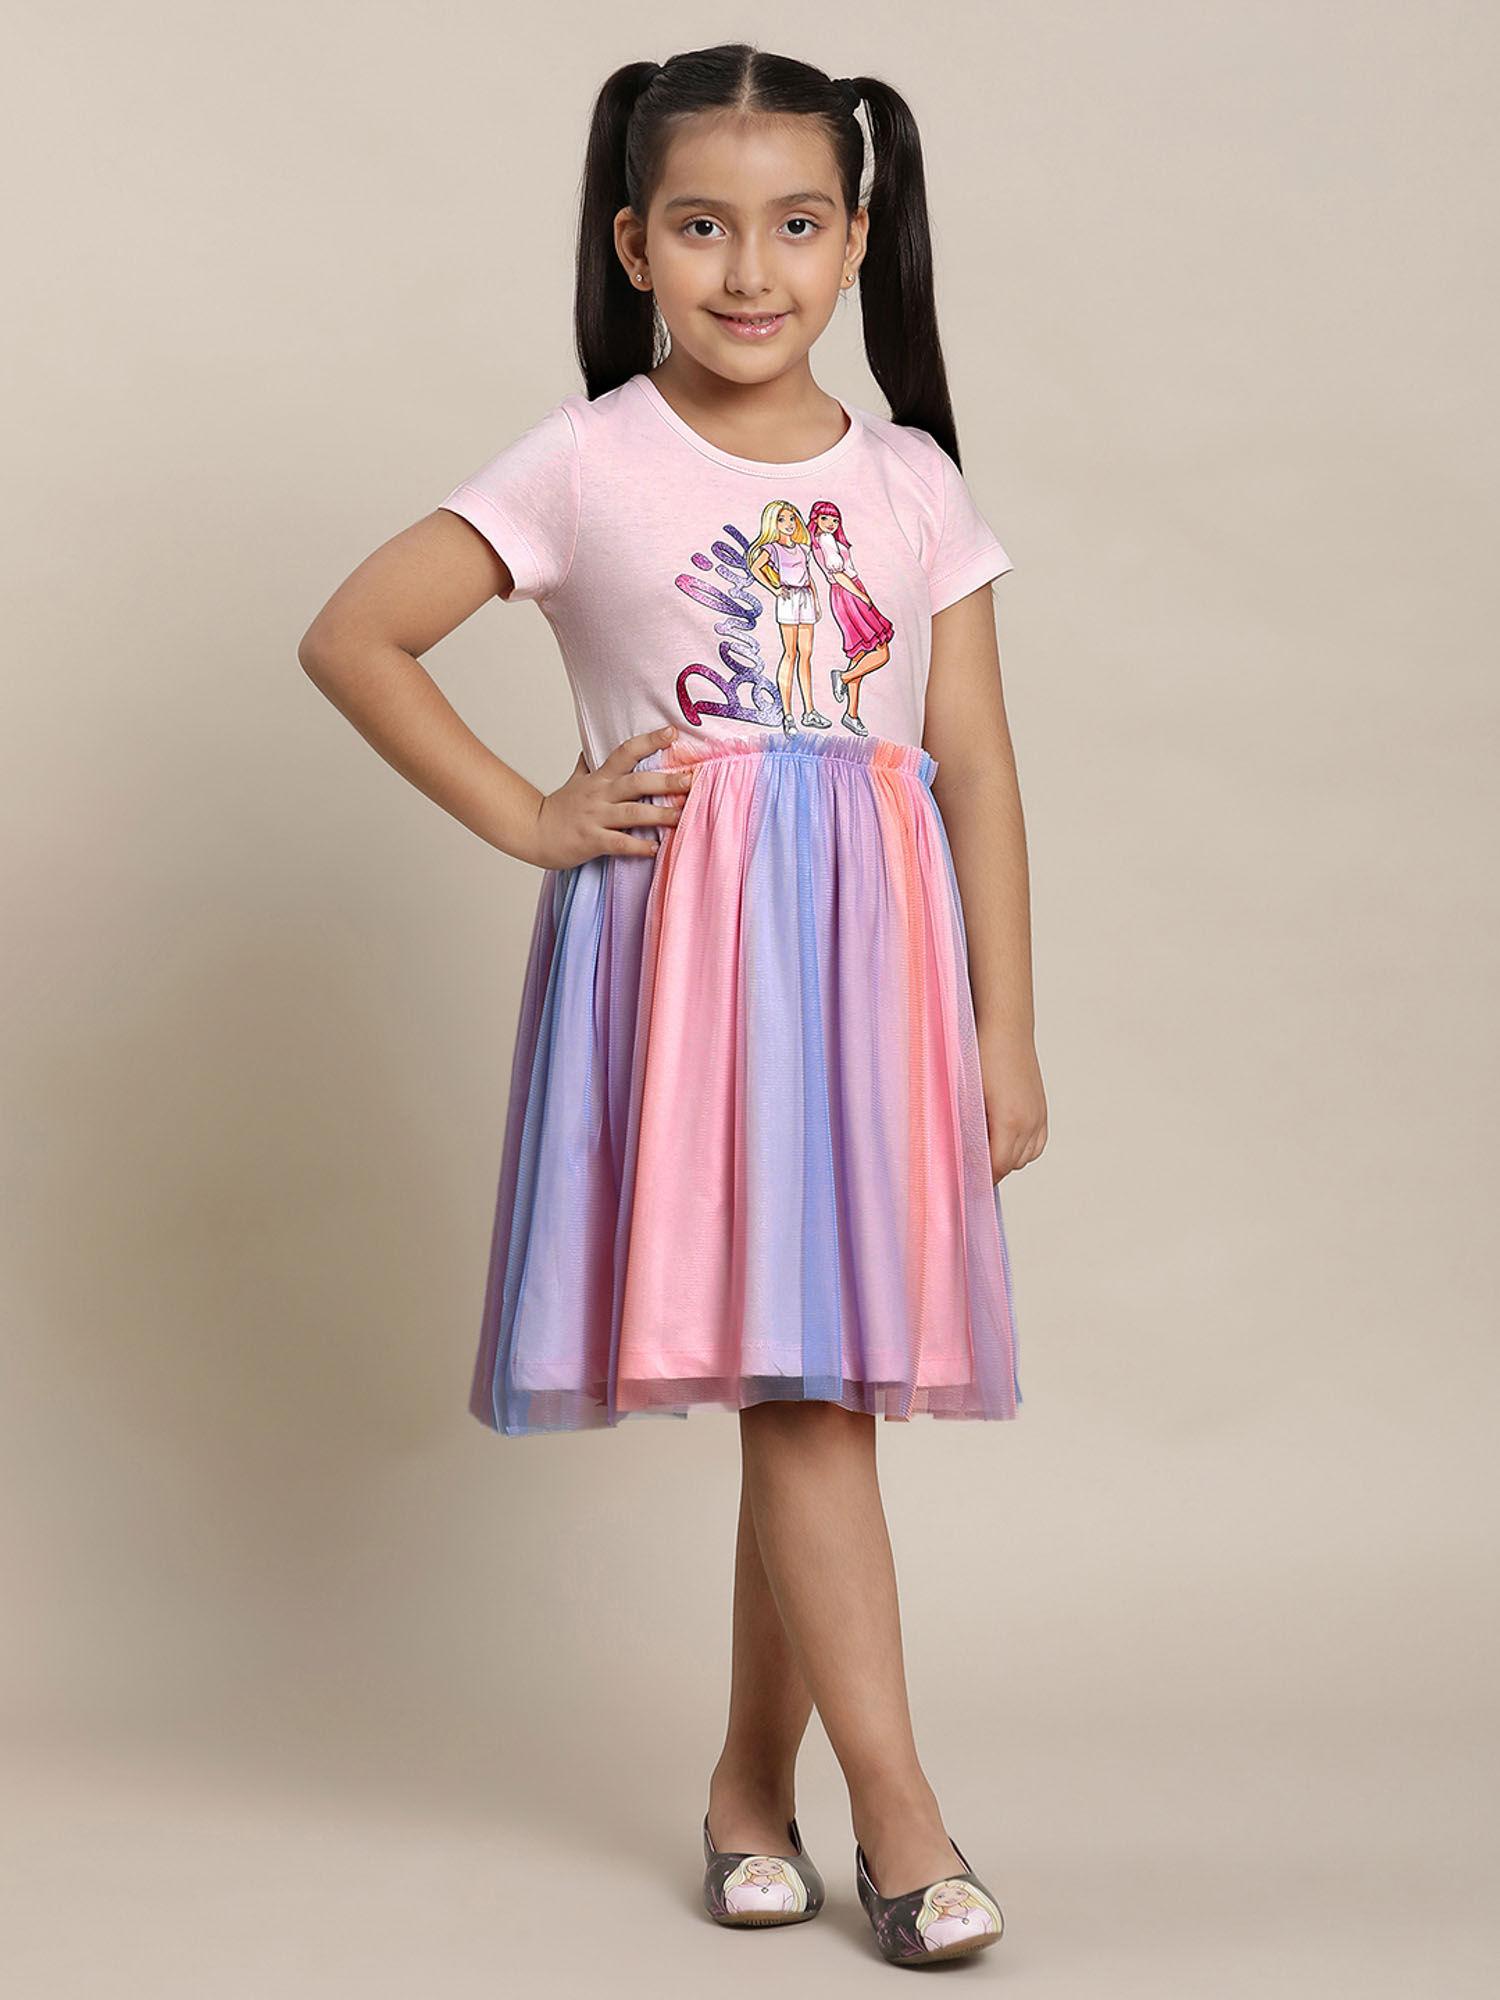 barbie printed pink dress for girls